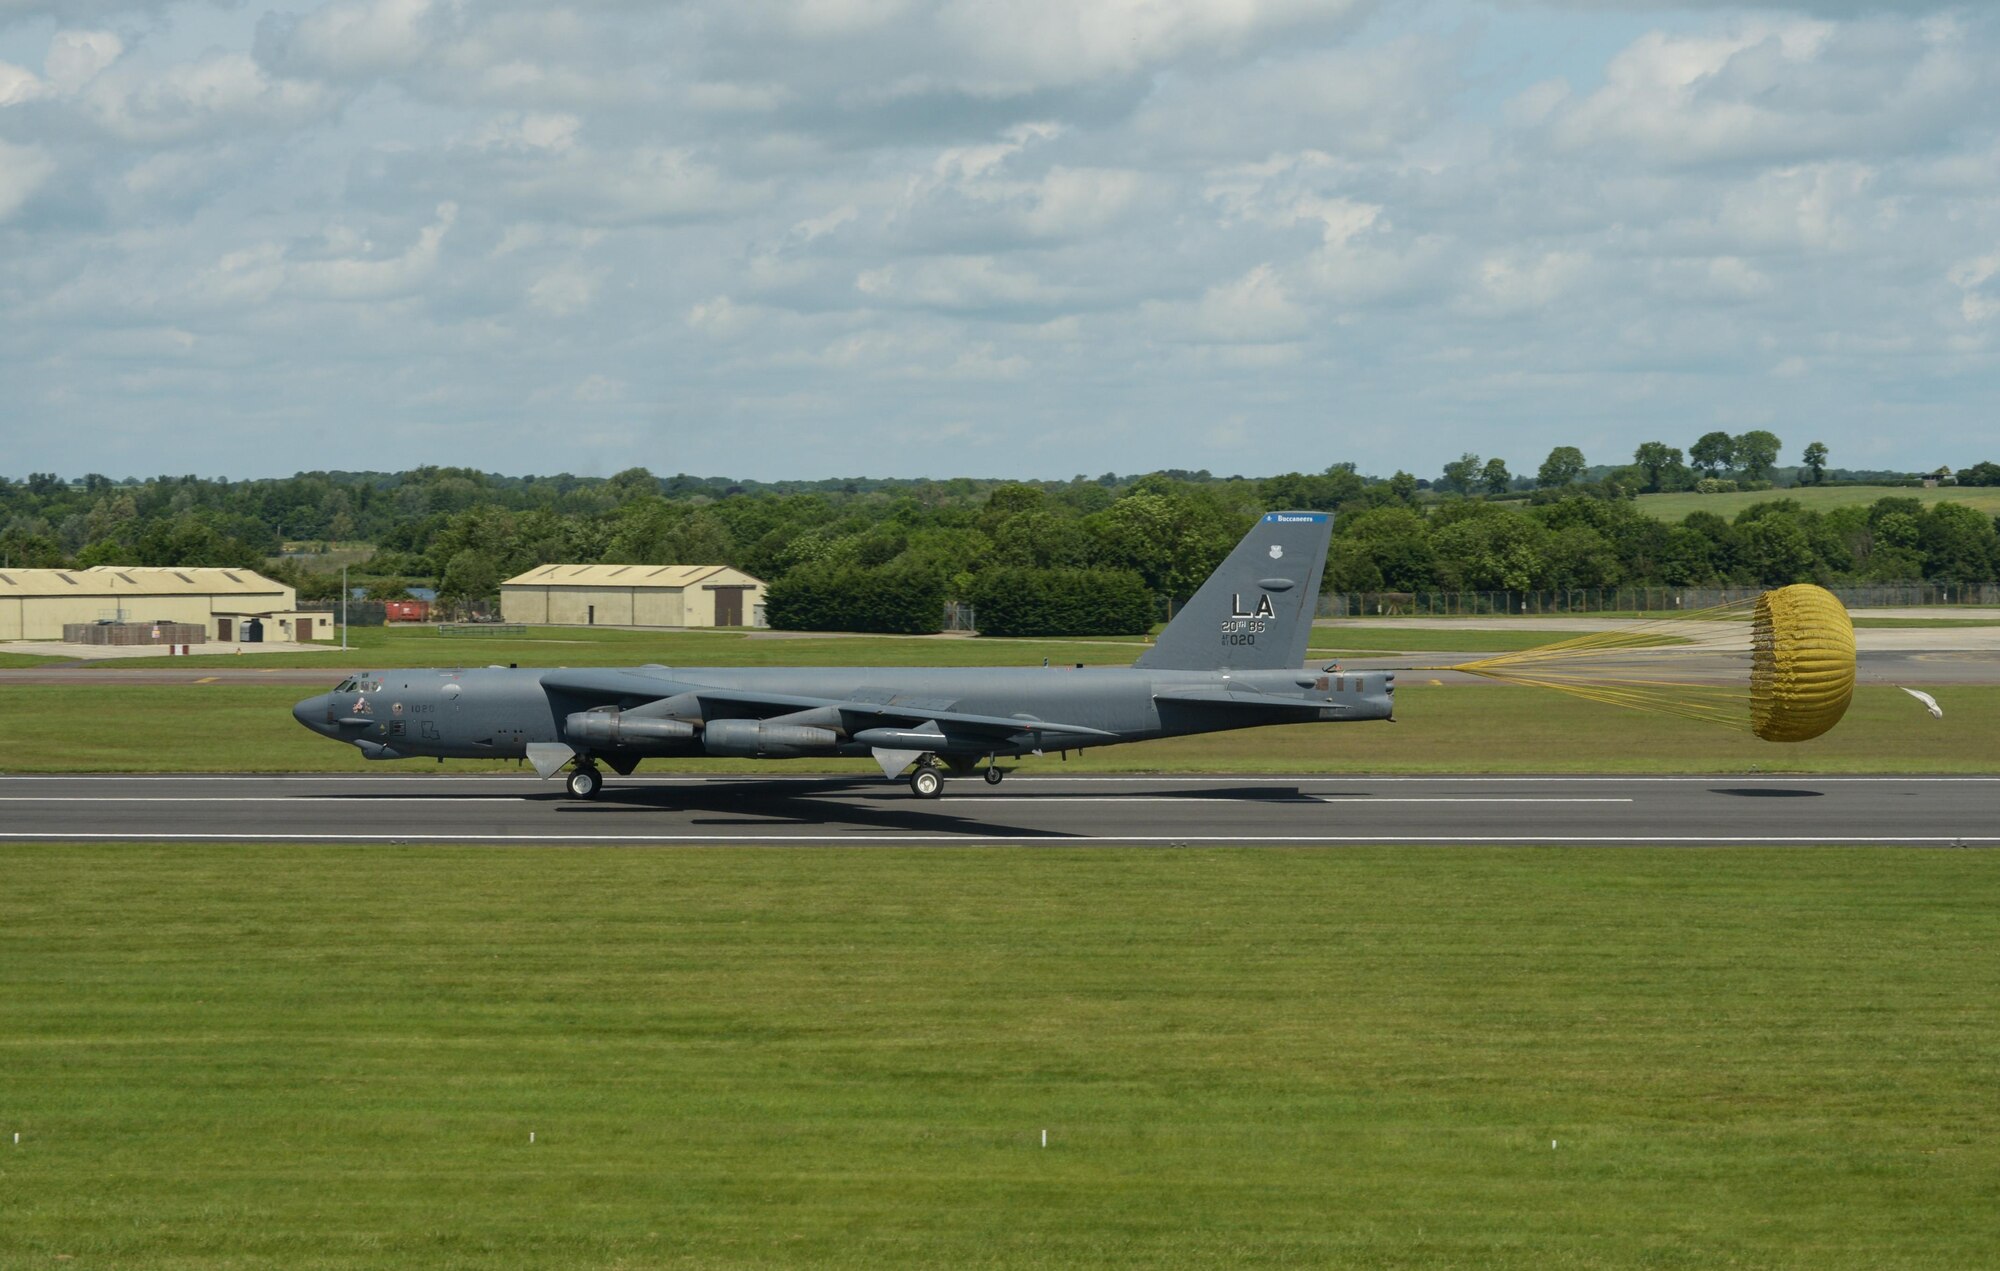 A B-52H Stratofortress arrives at Royal Air Force Fairford, United Kingdom, June 1, 2017. Three B-52s from the 2nd Bomb Wing, Barksdale Air Force Base, La., operated out of RAF Fairford in support of exercises Arctic Challenge, BALTOPS 17 and Saber Strike 17. The responsibility to deter a strategic attack against the U.S. and its allies is U.S. Strategic Command’s fundamental mission. These missions validate the readiness and capability of its bomber forces, which is a critical component of the safe, secure, effective and ready deterrent force that USSTRATCOM provides the nation and its allies. The B-52 is a long-range, heavy bomber that can perform strategic attack, close-air support, air interdiction, offensive counter-air and maritime operations. (U.S. Air Force photo/Senior Airman Curt Beach)